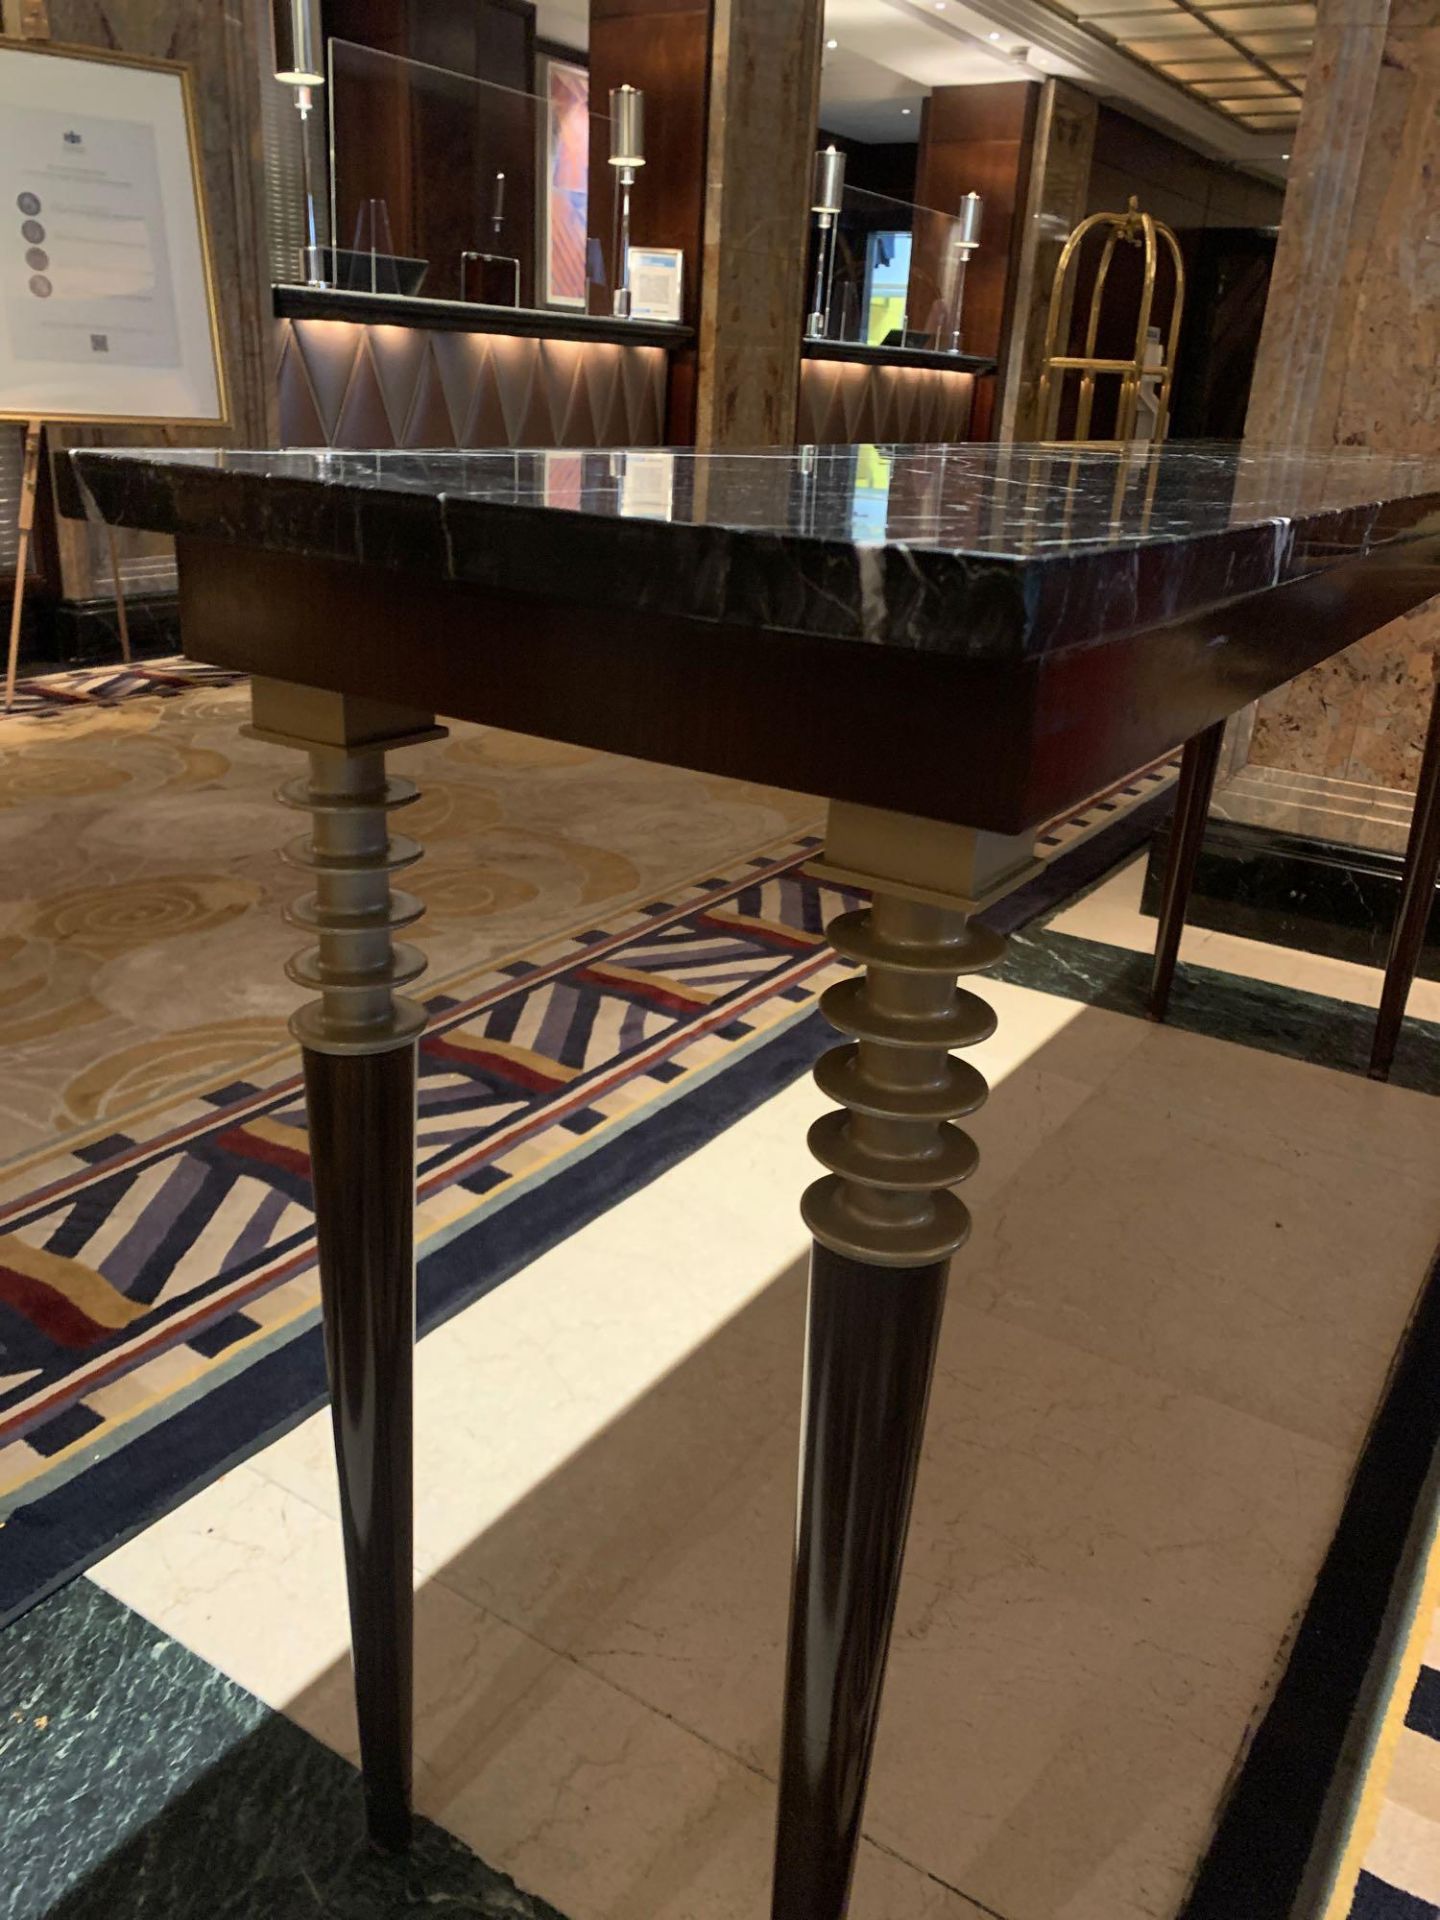 A Black Marble Top Console Table With Wooden Legs With Gold Accent Detail 180cm x 45cm x 86cm Tall ( - Image 3 of 5